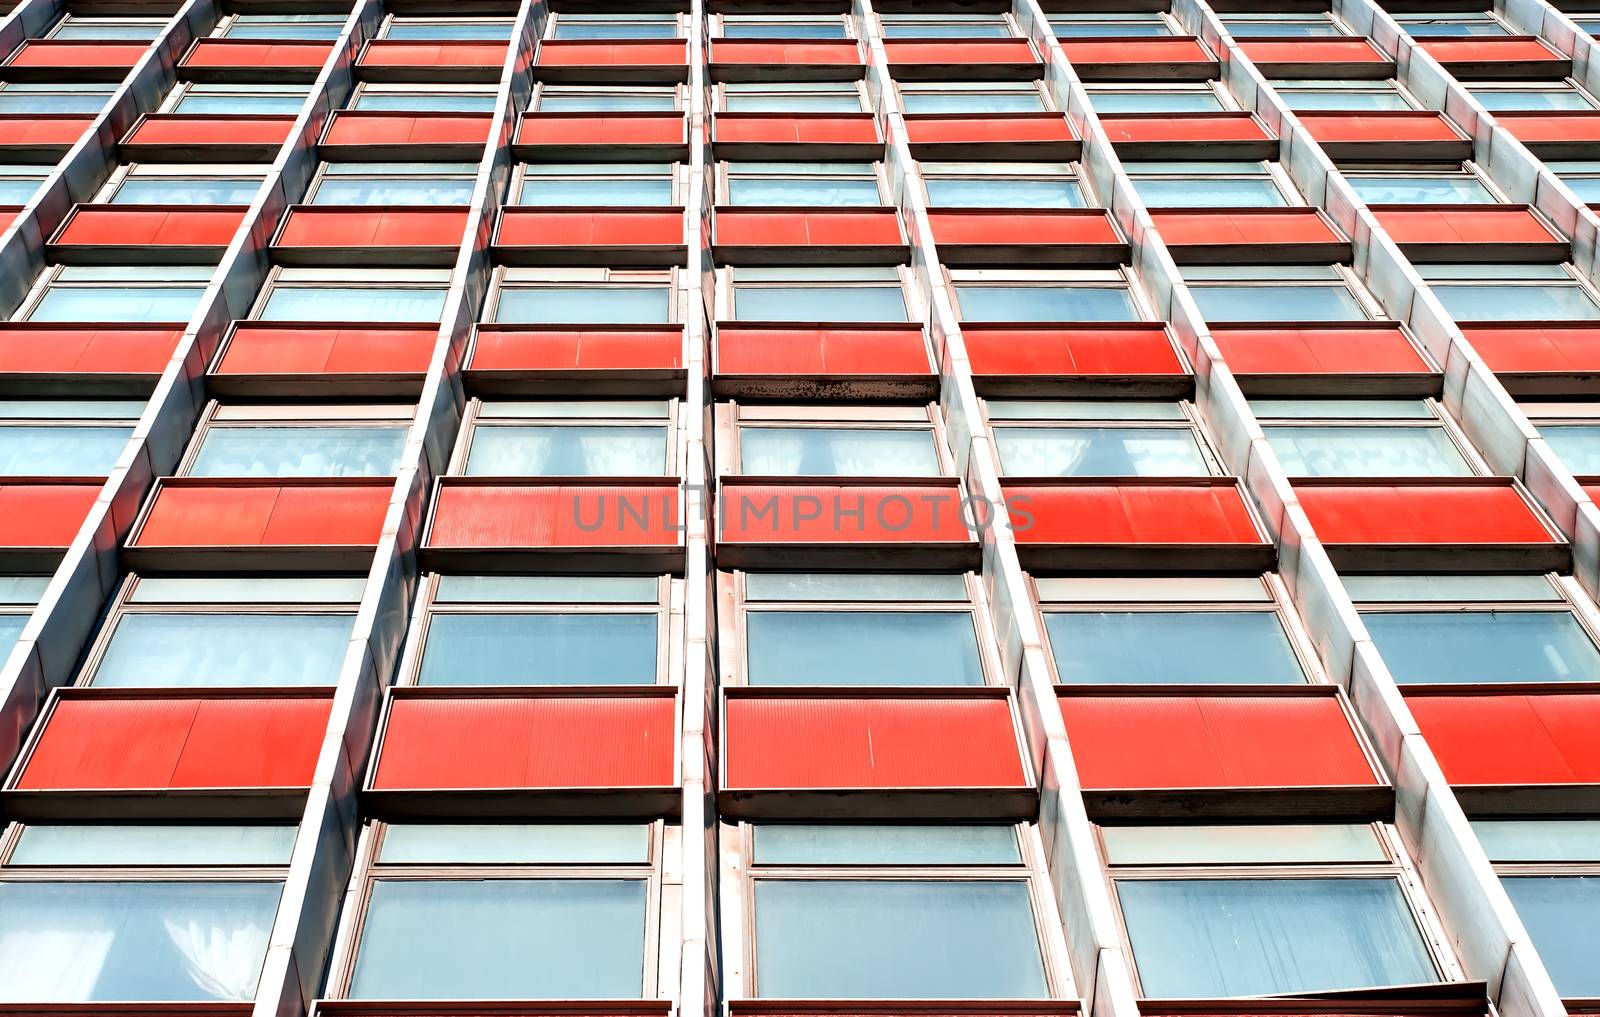 Multistory office building with terracotta panels by Cipariss